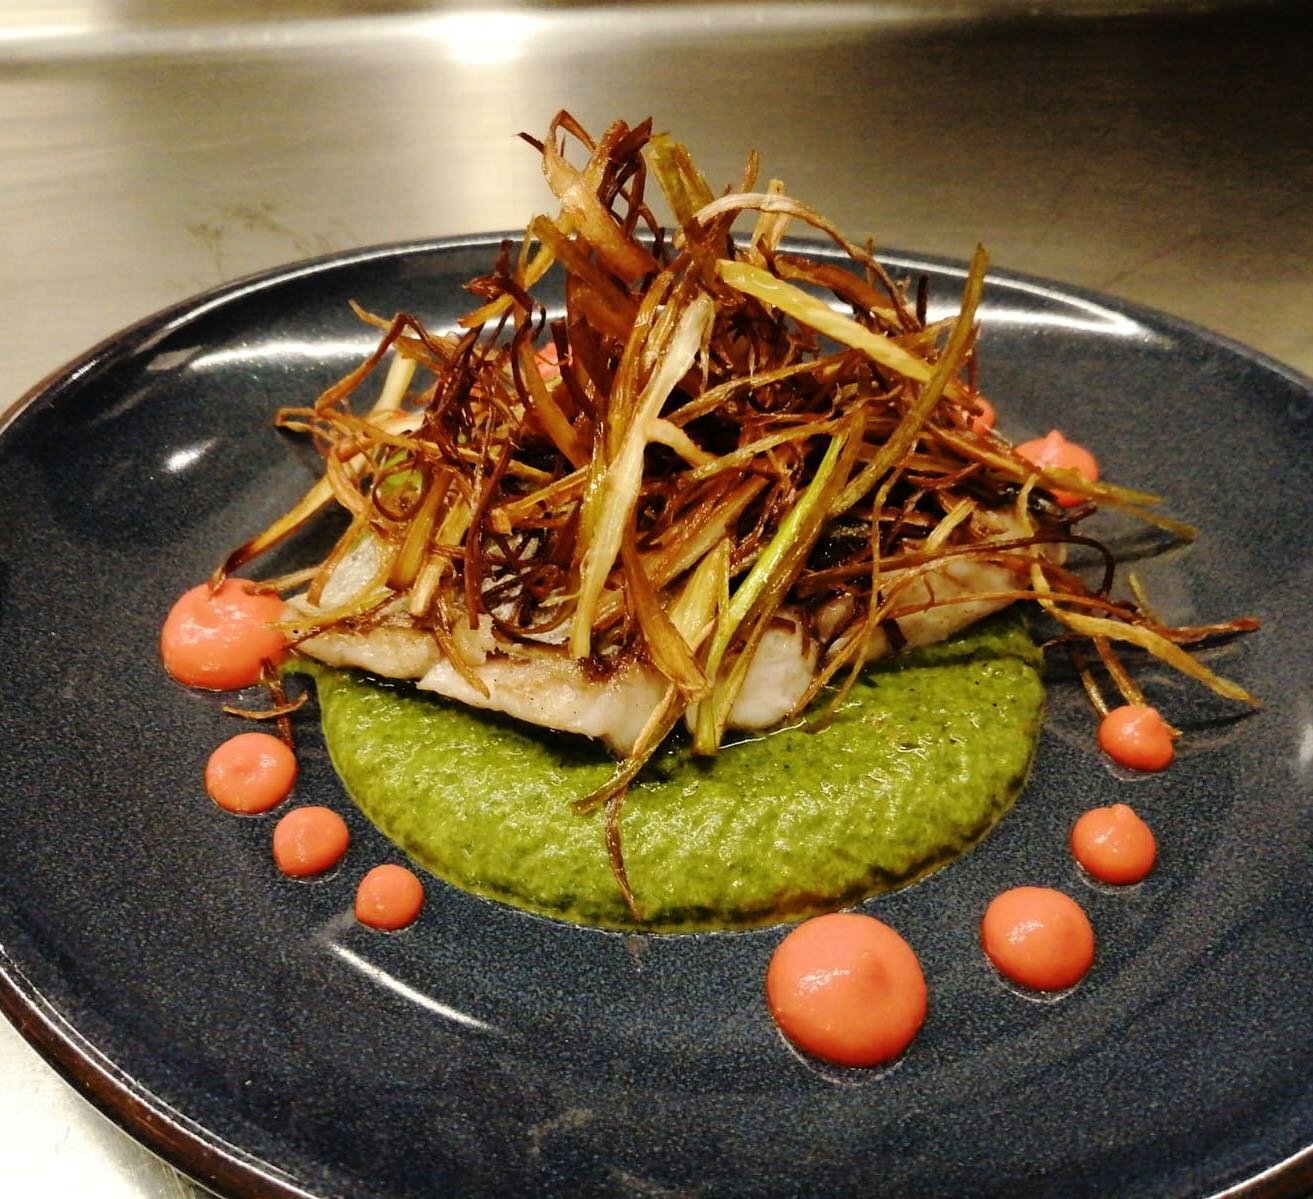 Anchovy with spinach puree